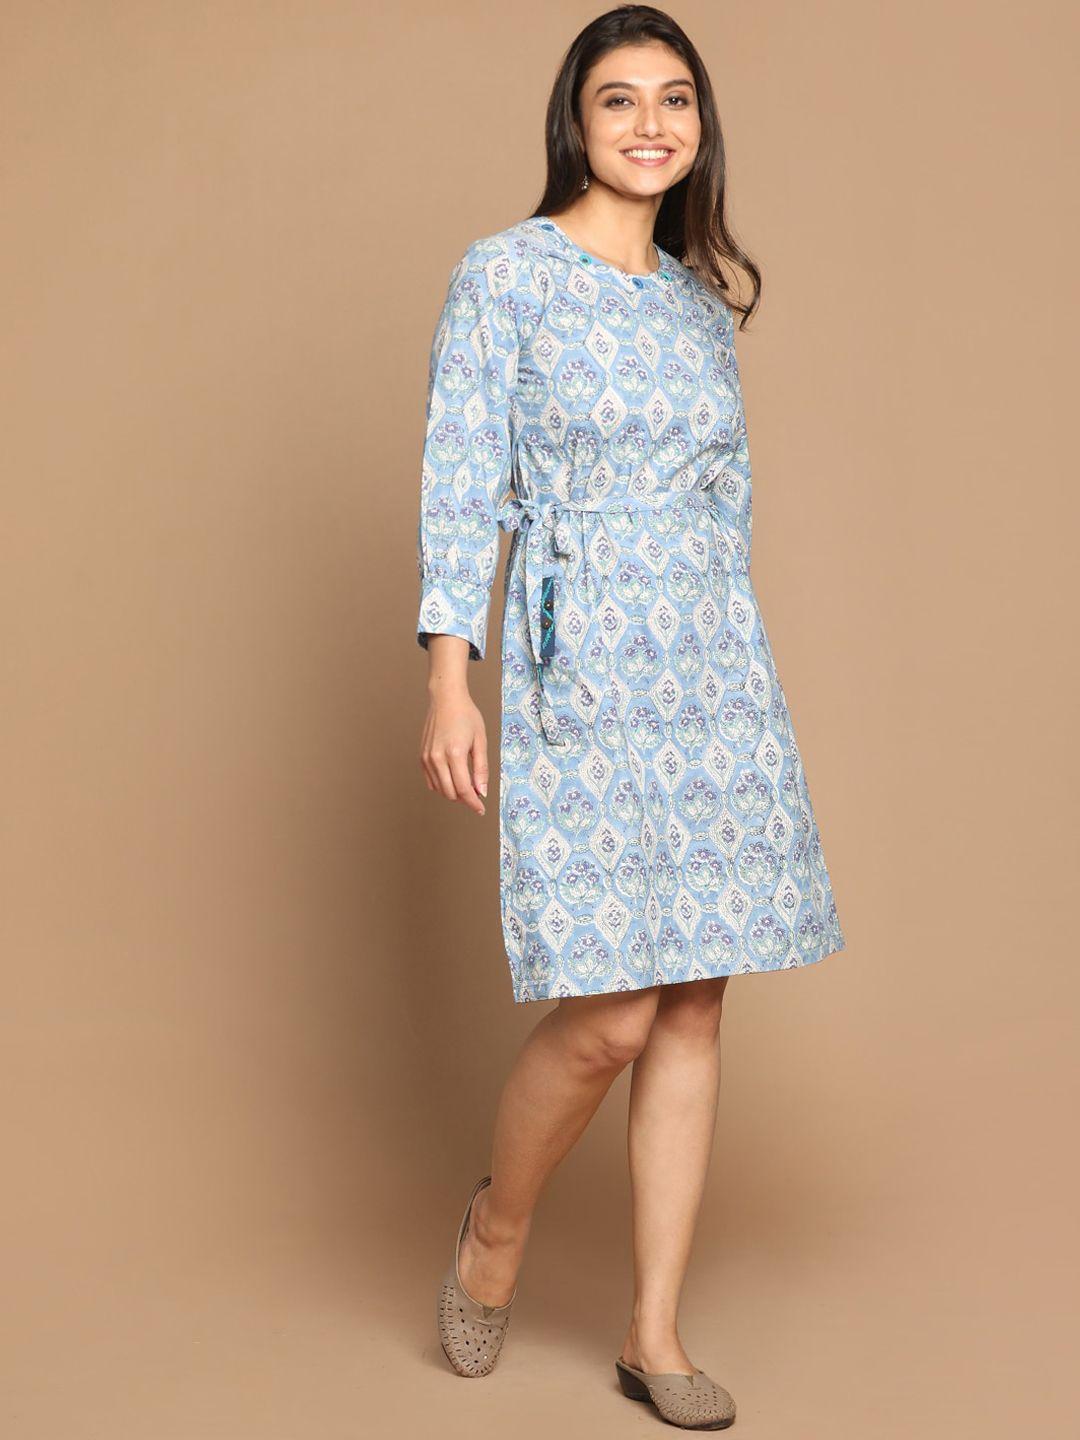 earthwear blue block printed cotton dress with mirror detailing